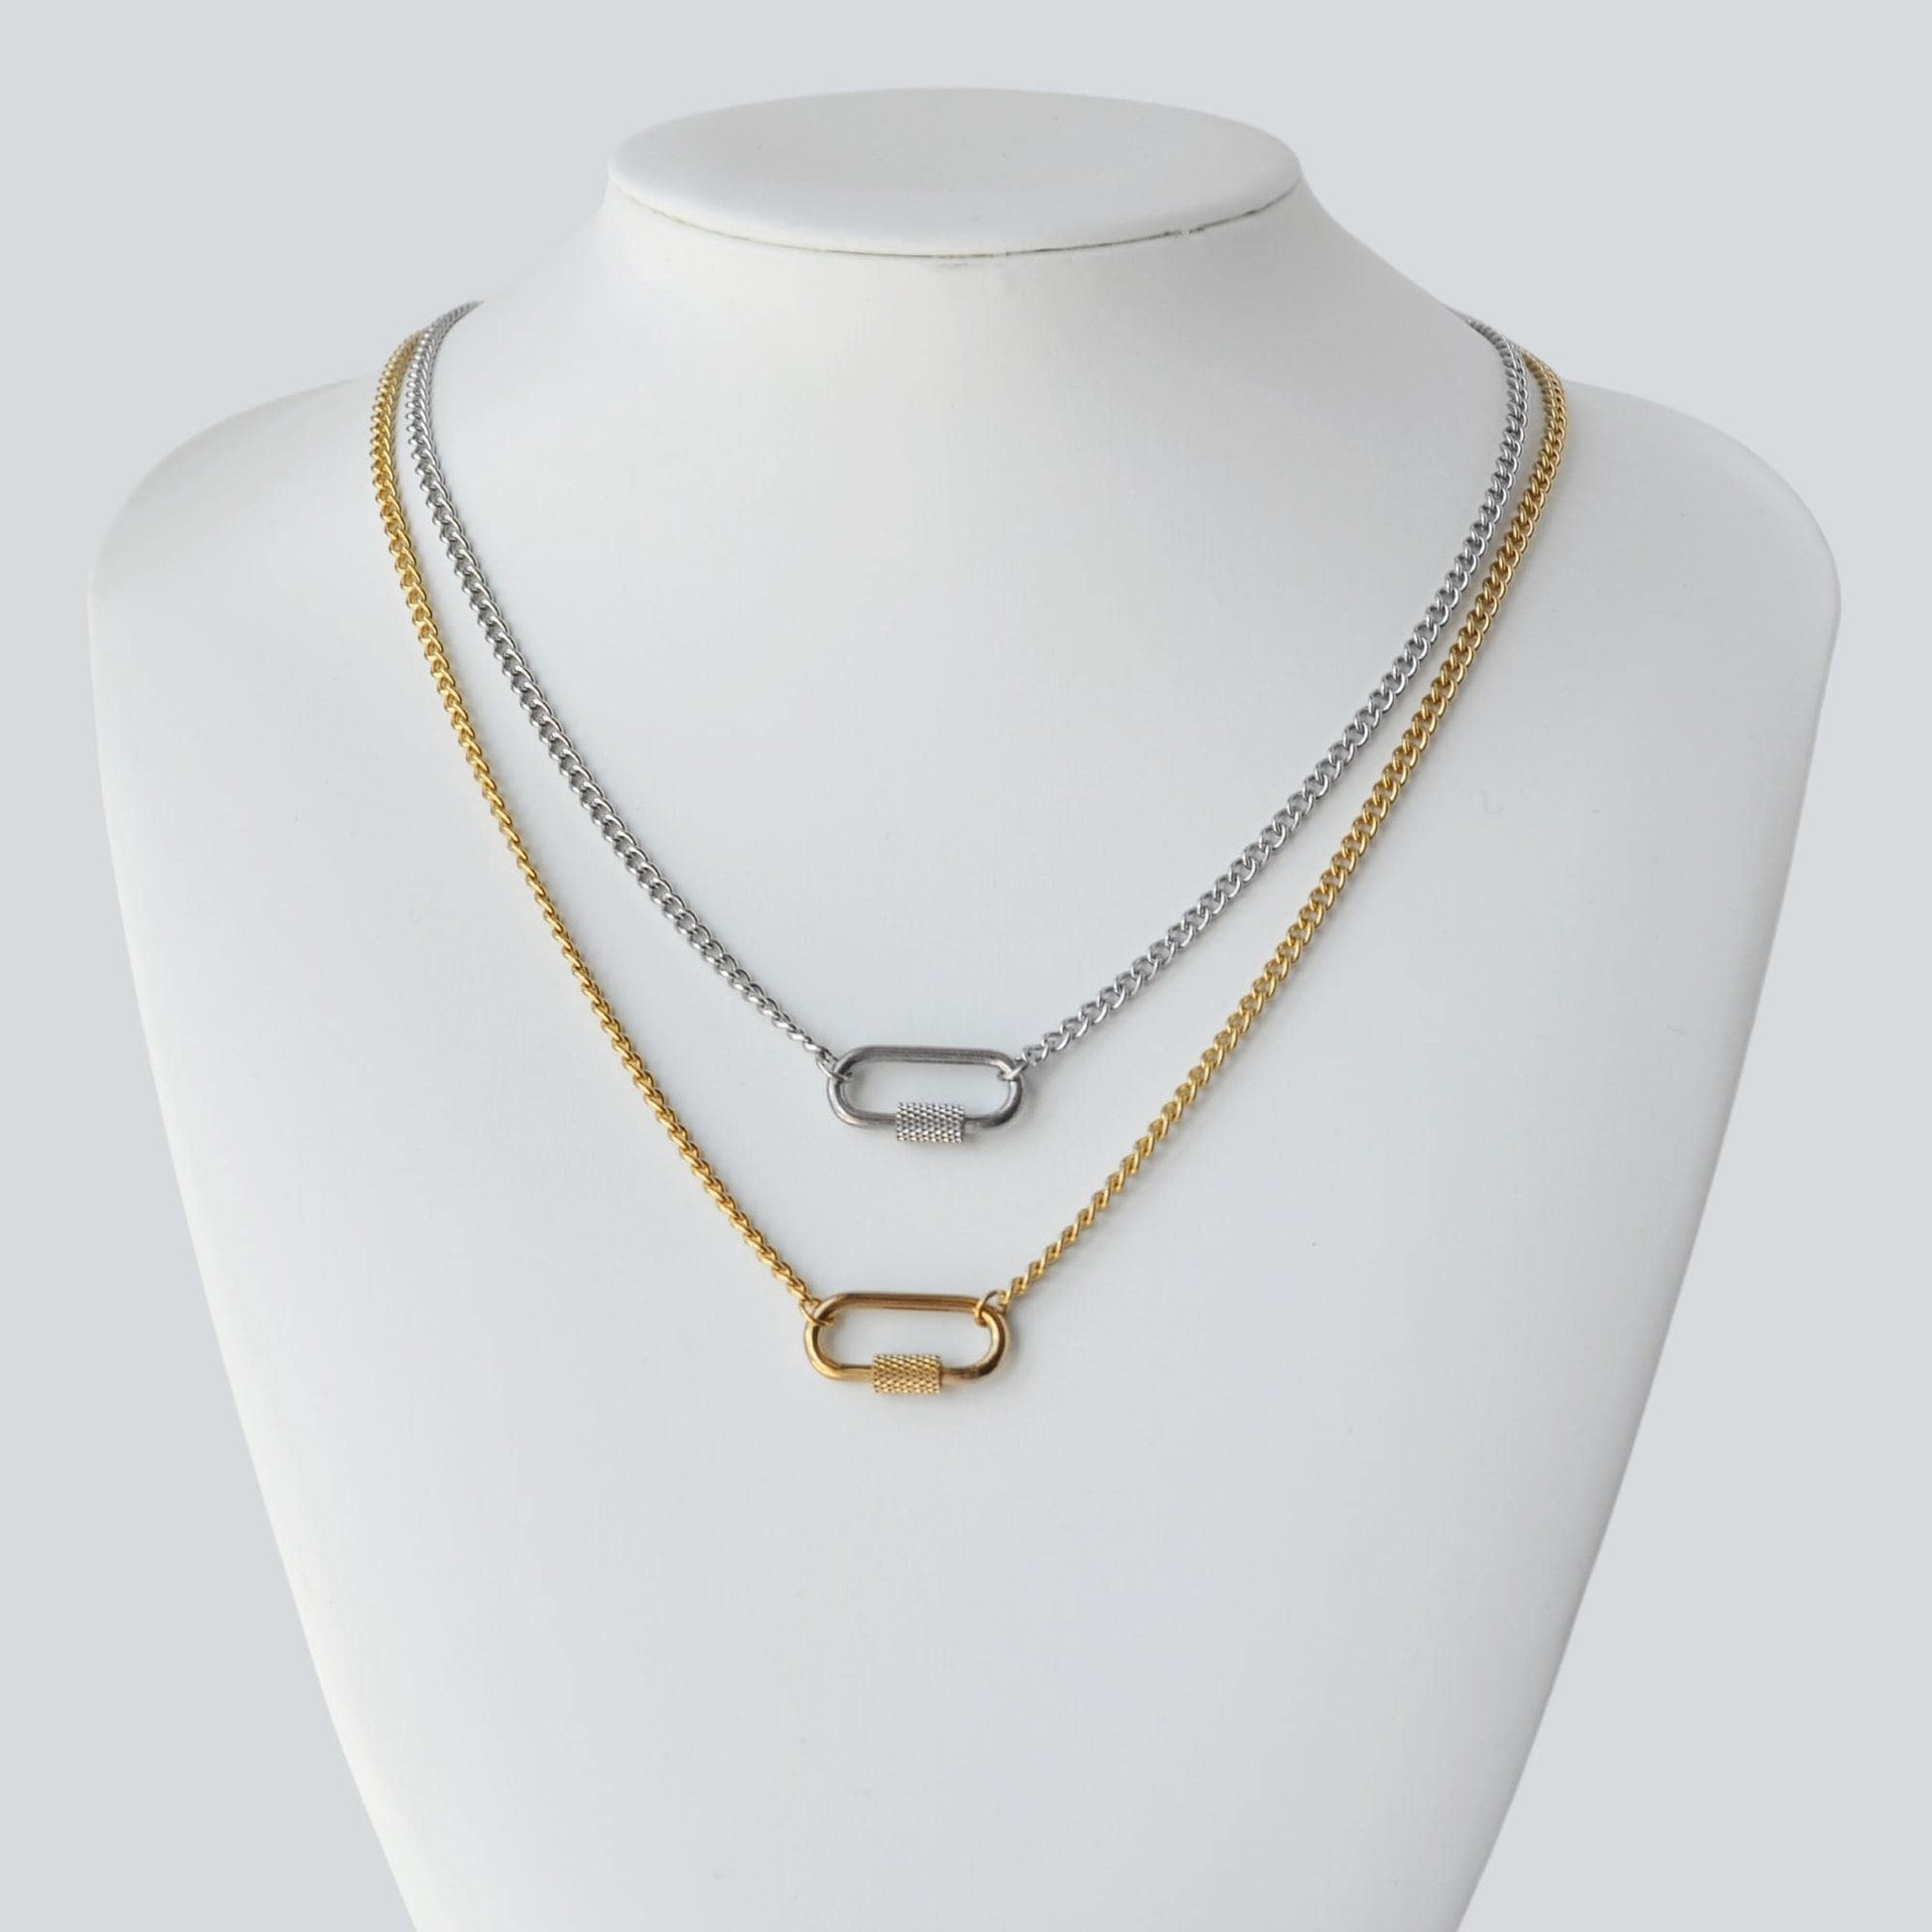 Gold Carabiner Necklace